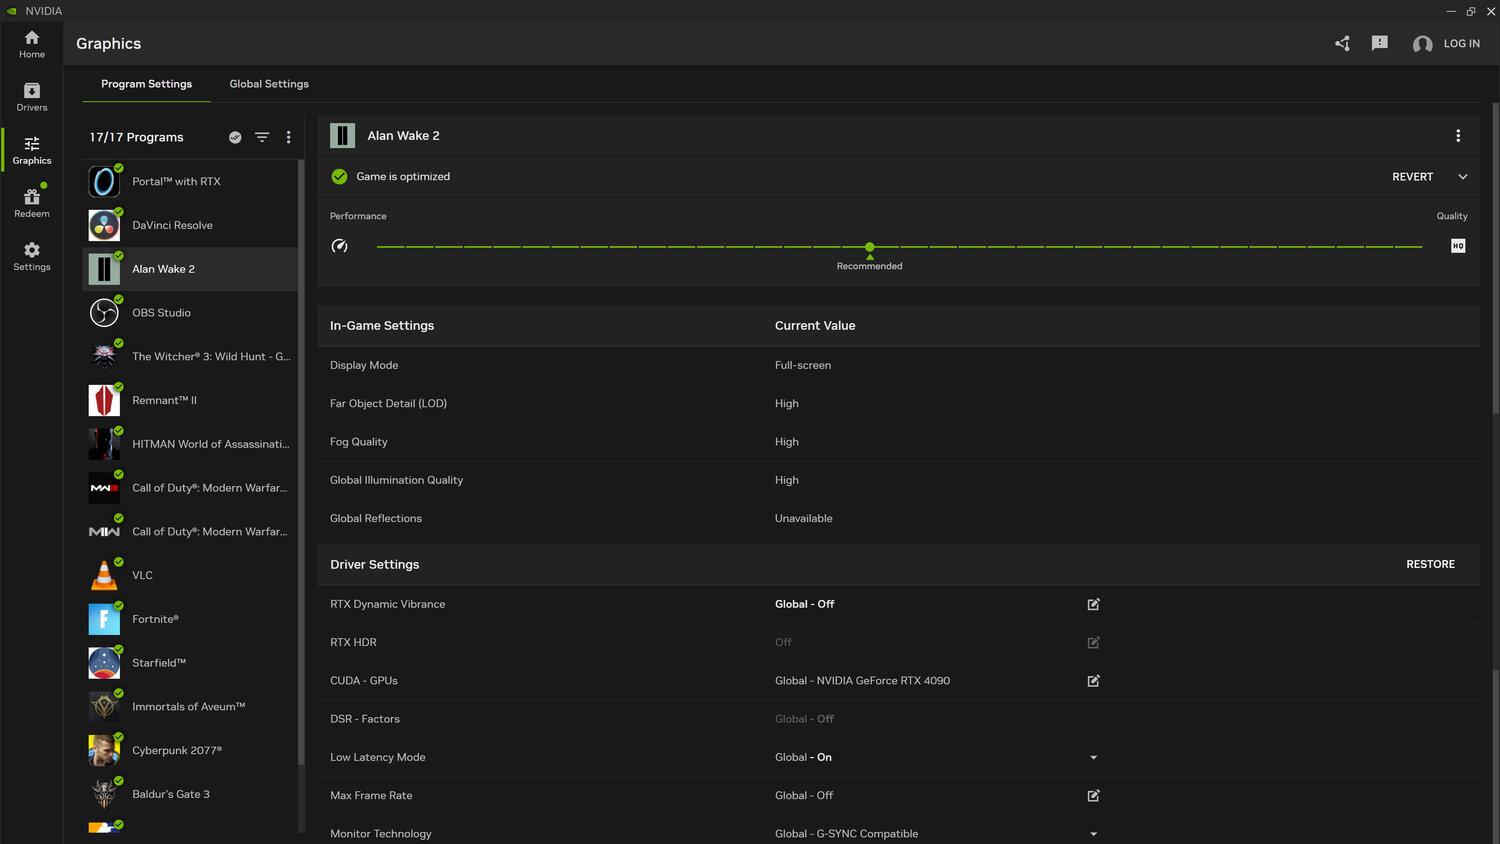 nvidia app graphics and settings section1